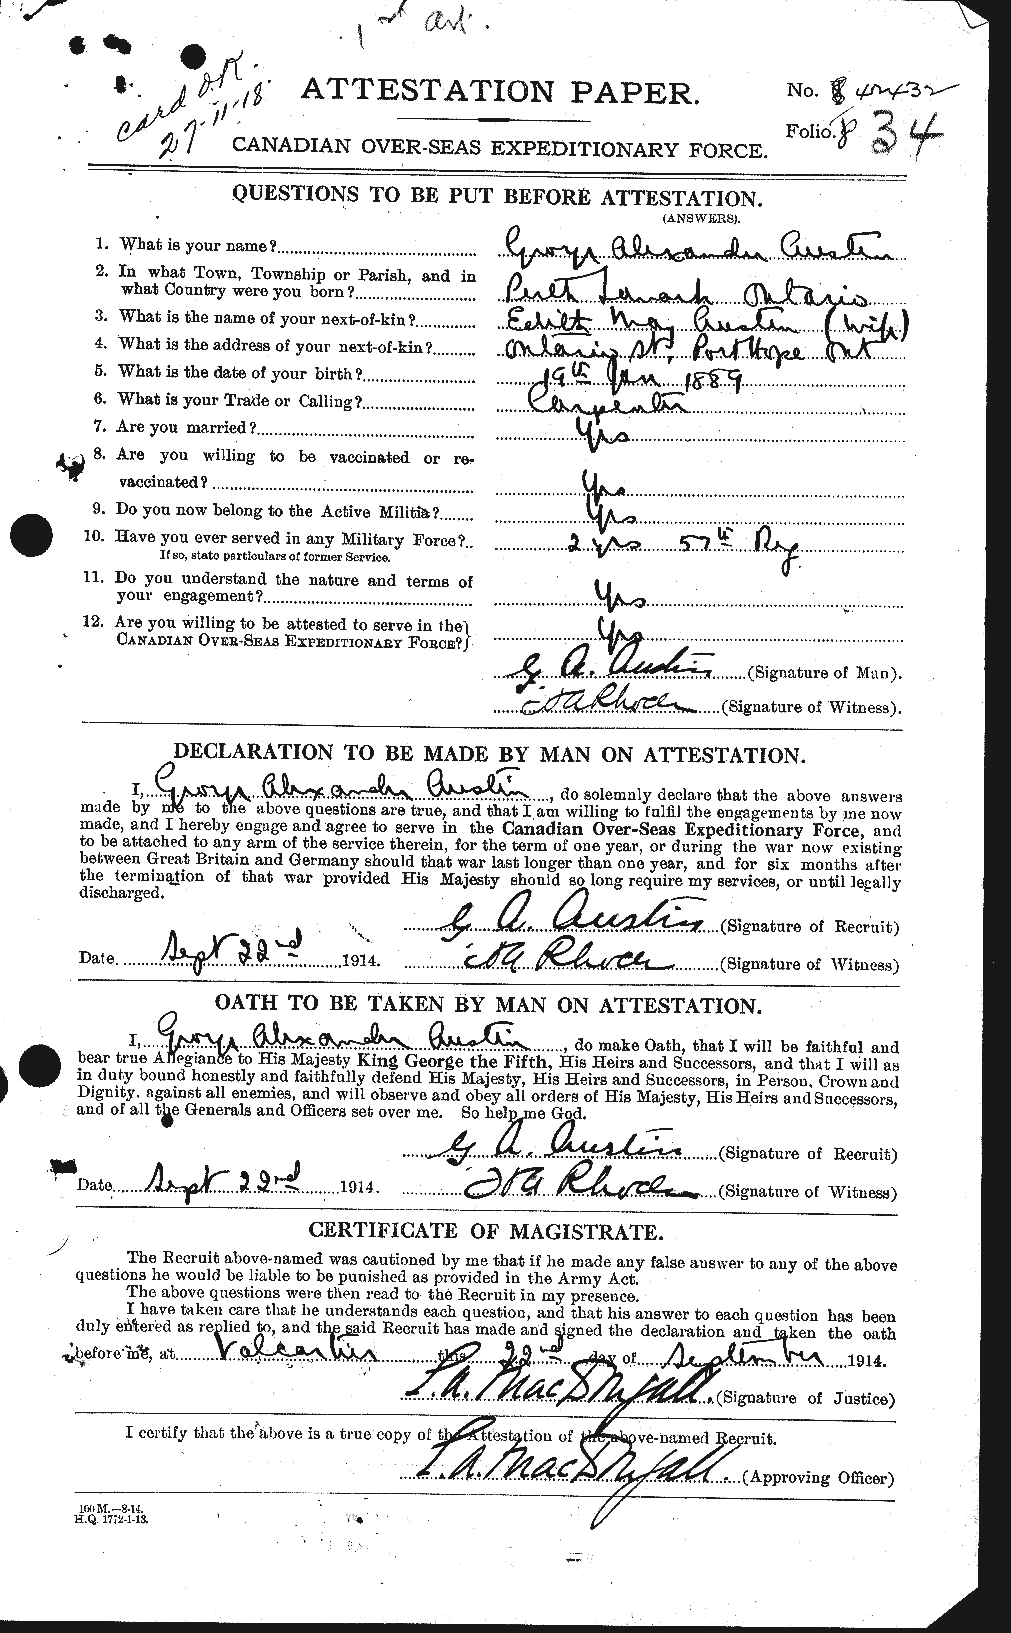 Personnel Records of the First World War - CEF 215386a